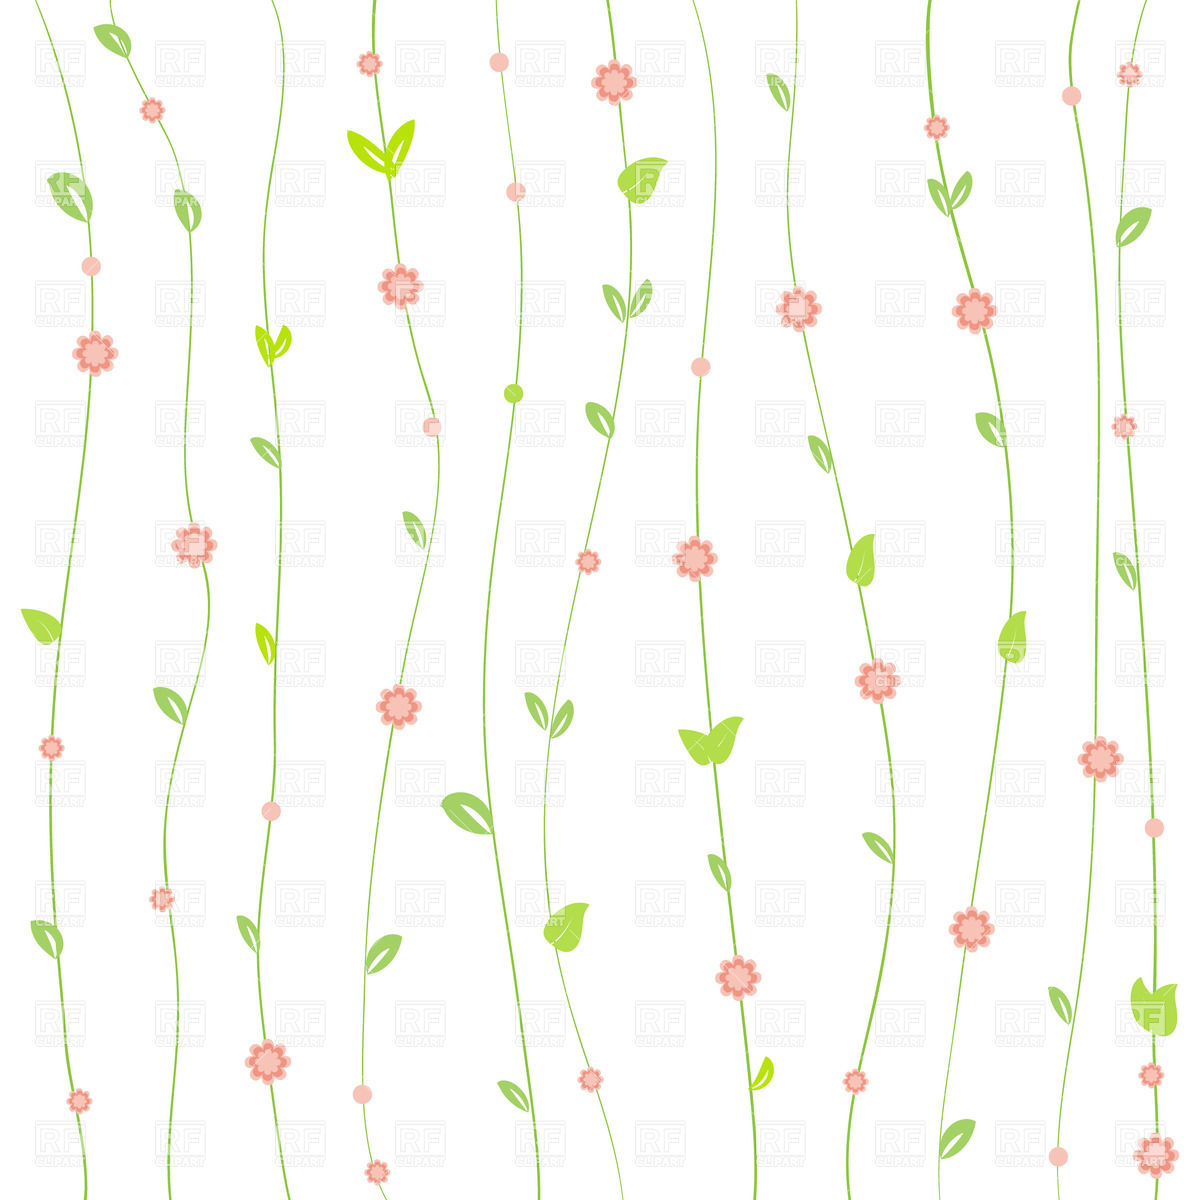 Background Clip Art Free Down